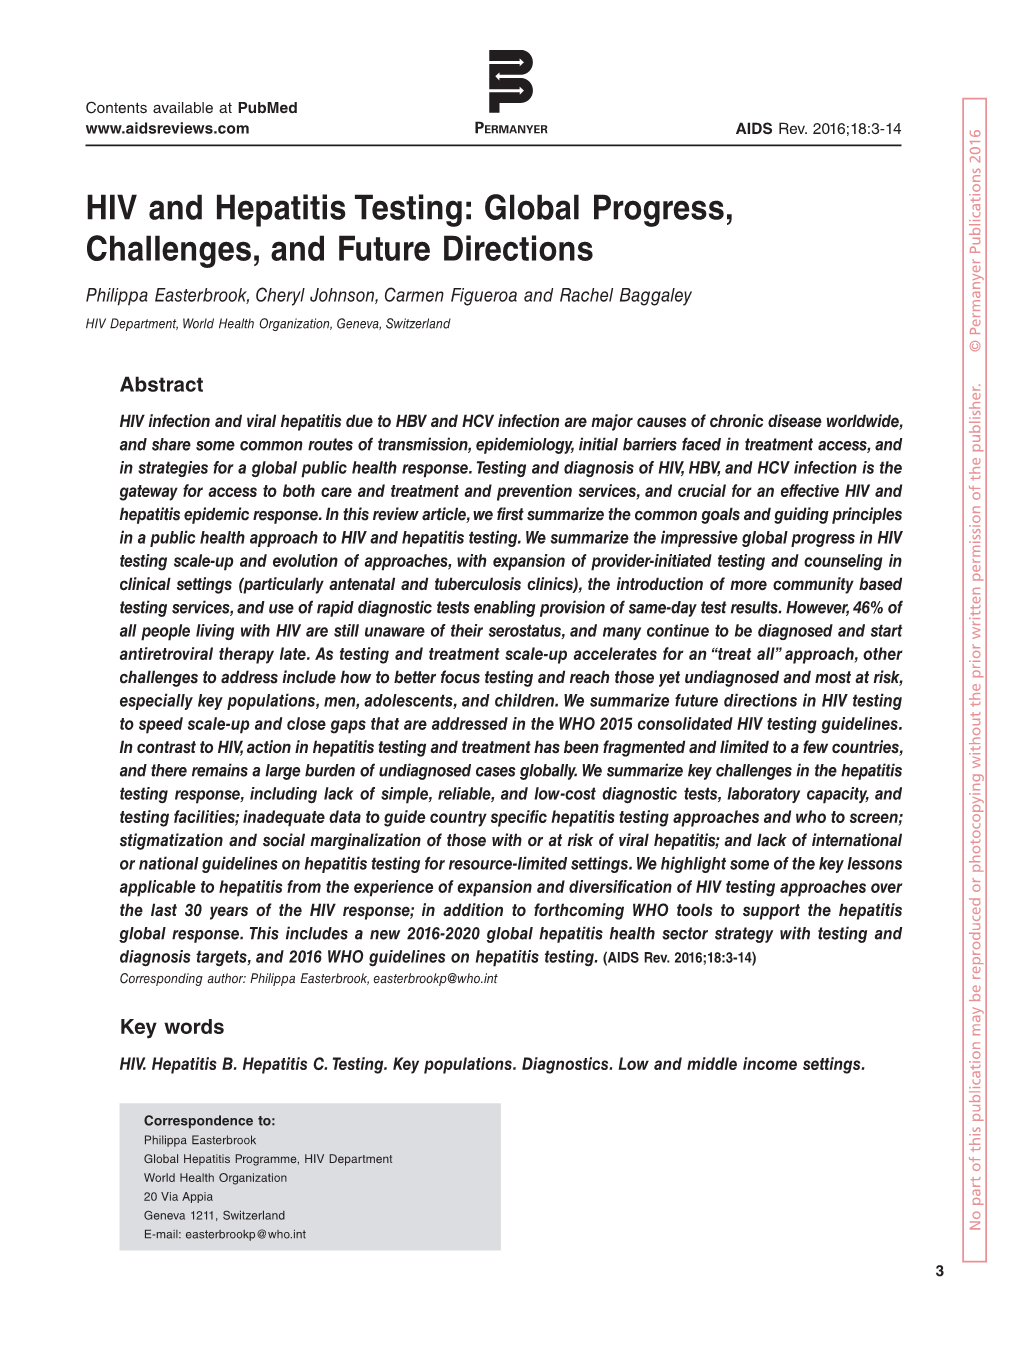 HIV and Hepatitis Testing: Global Progress, Challenges, and Future Directions